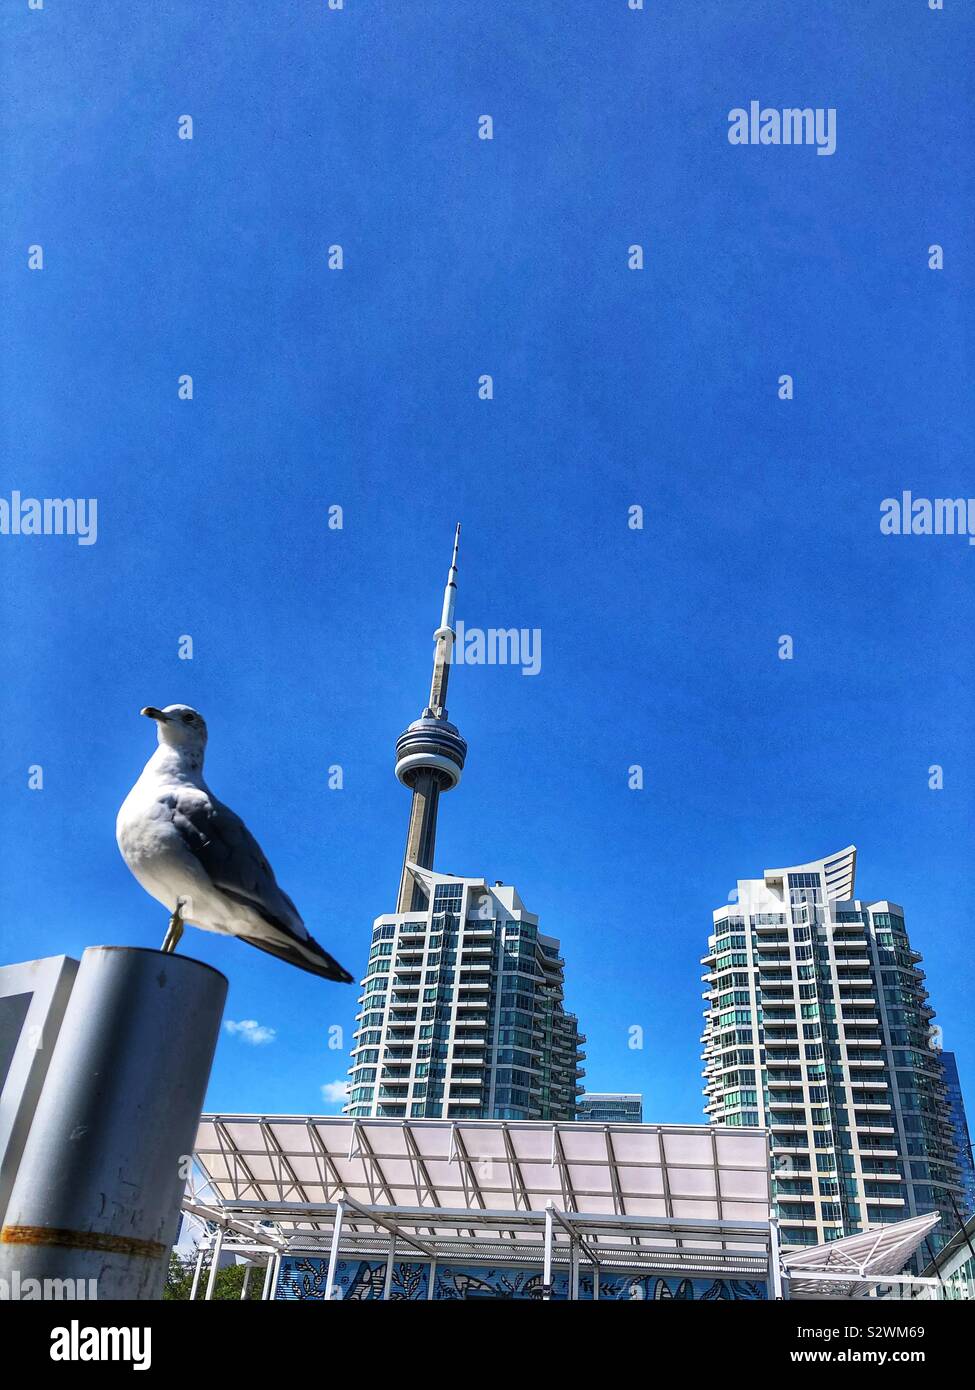 A seagull, the iconic CN Tower and modern buildings at Toronto’s Harbourfront Centre. Stock Photo